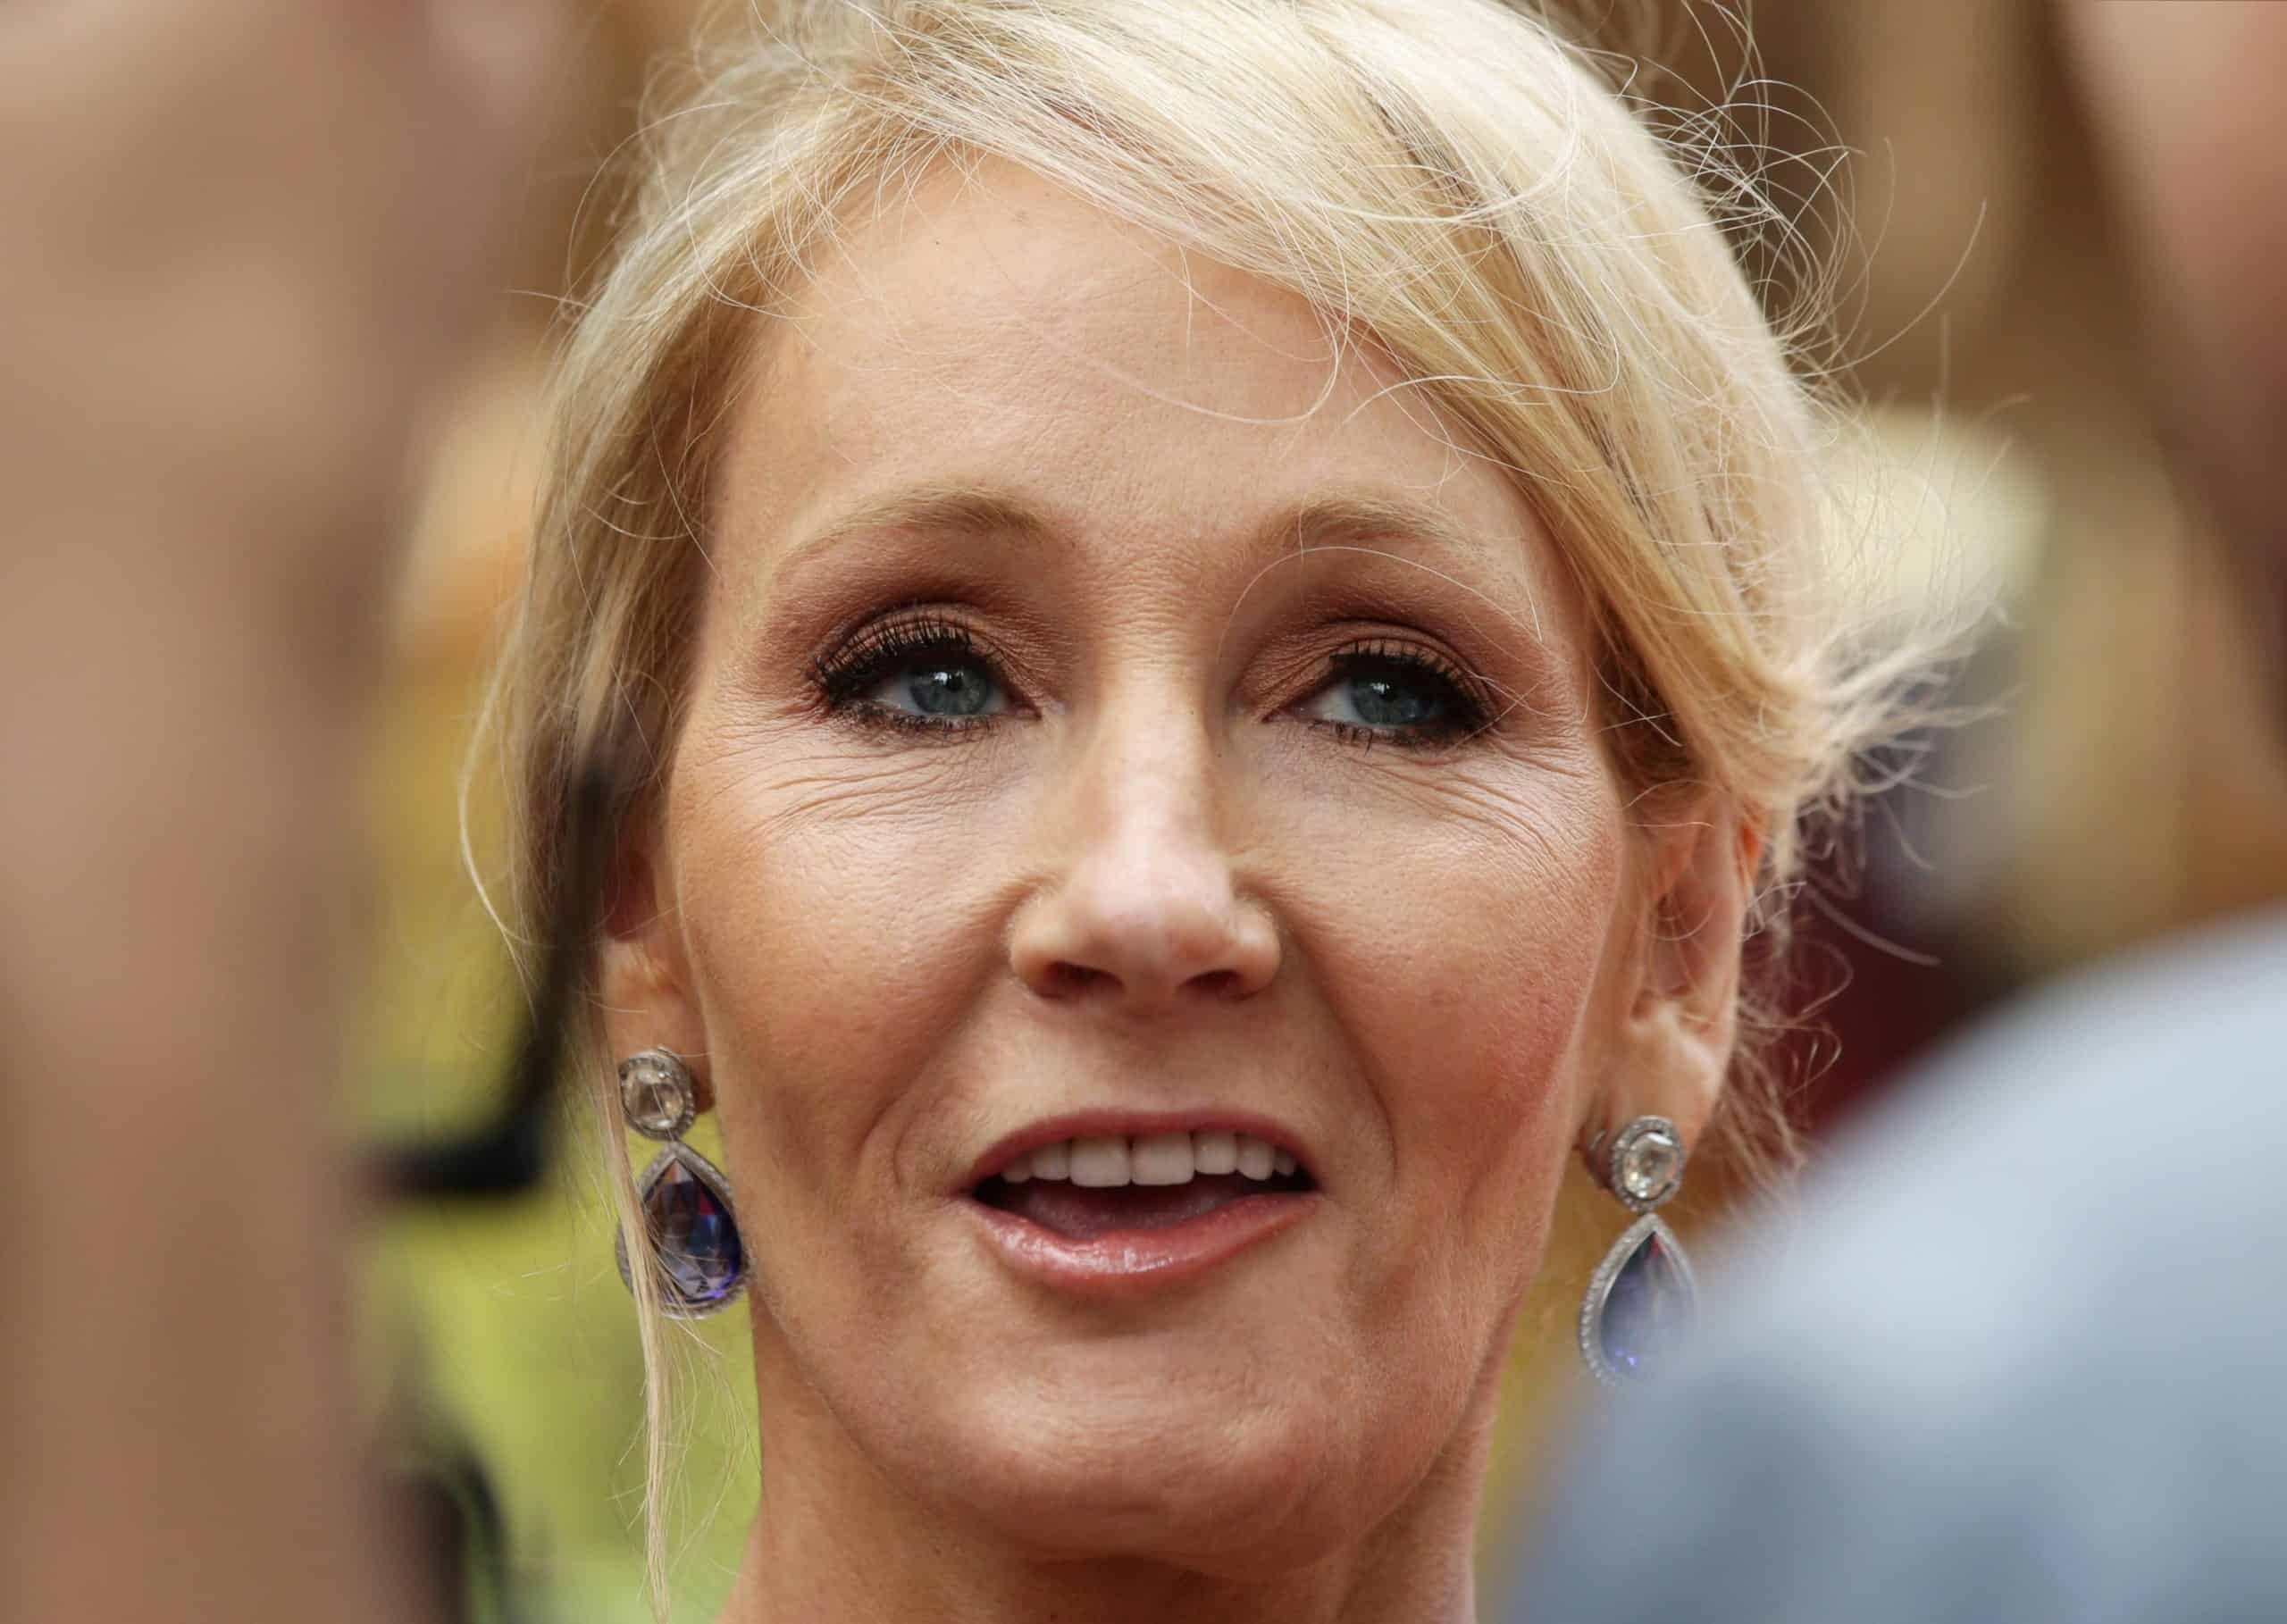 JK Rowling says Harry Potter stars can ‘save their apologies’